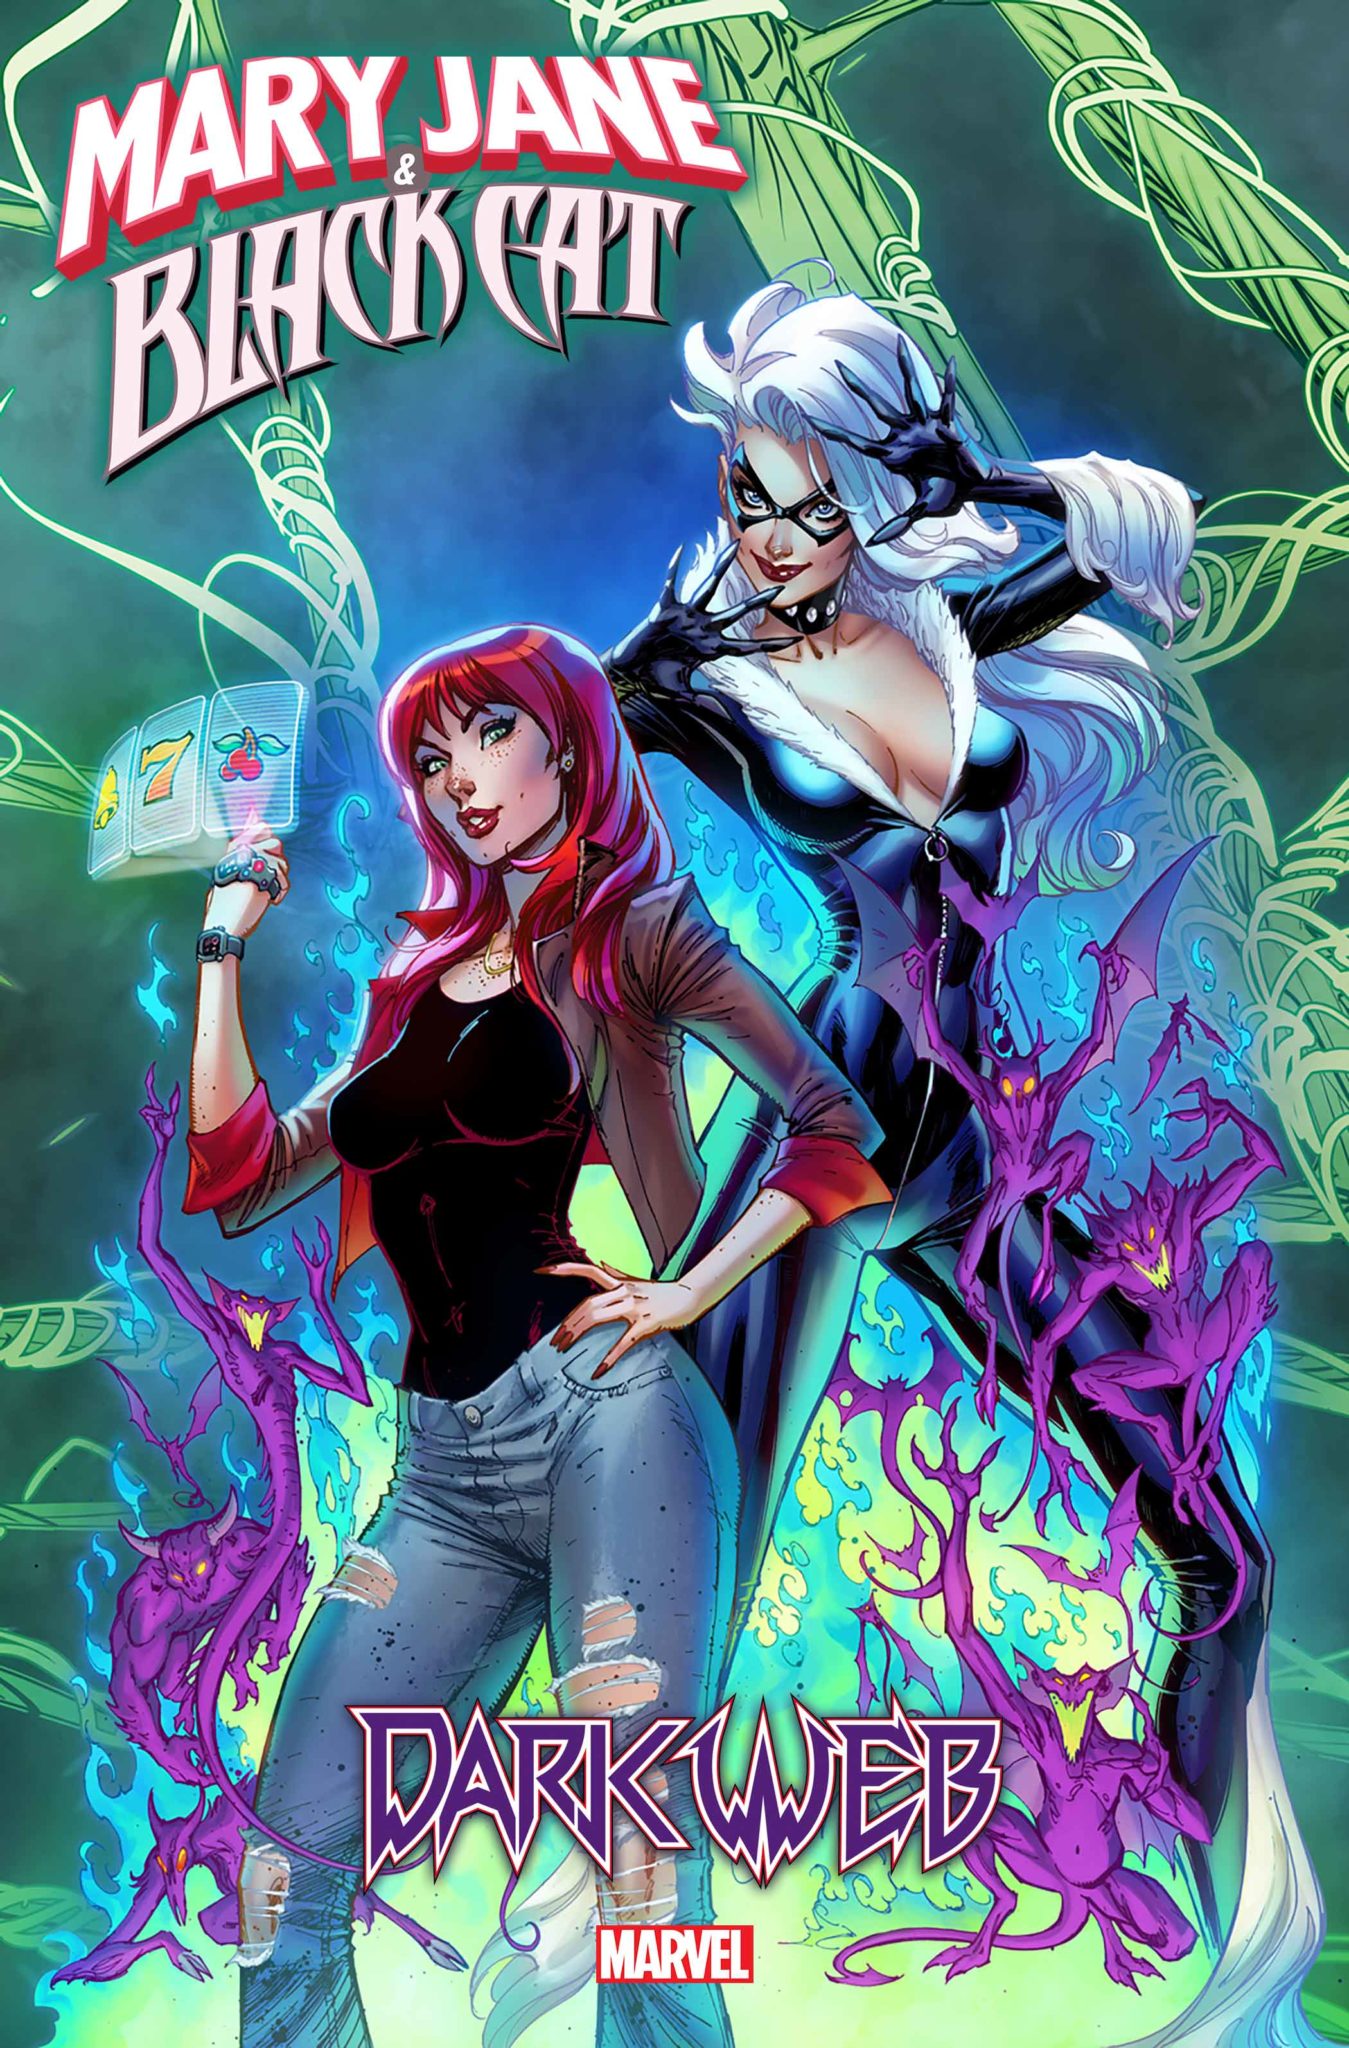 Mary Jane & Black Cat #1 cover